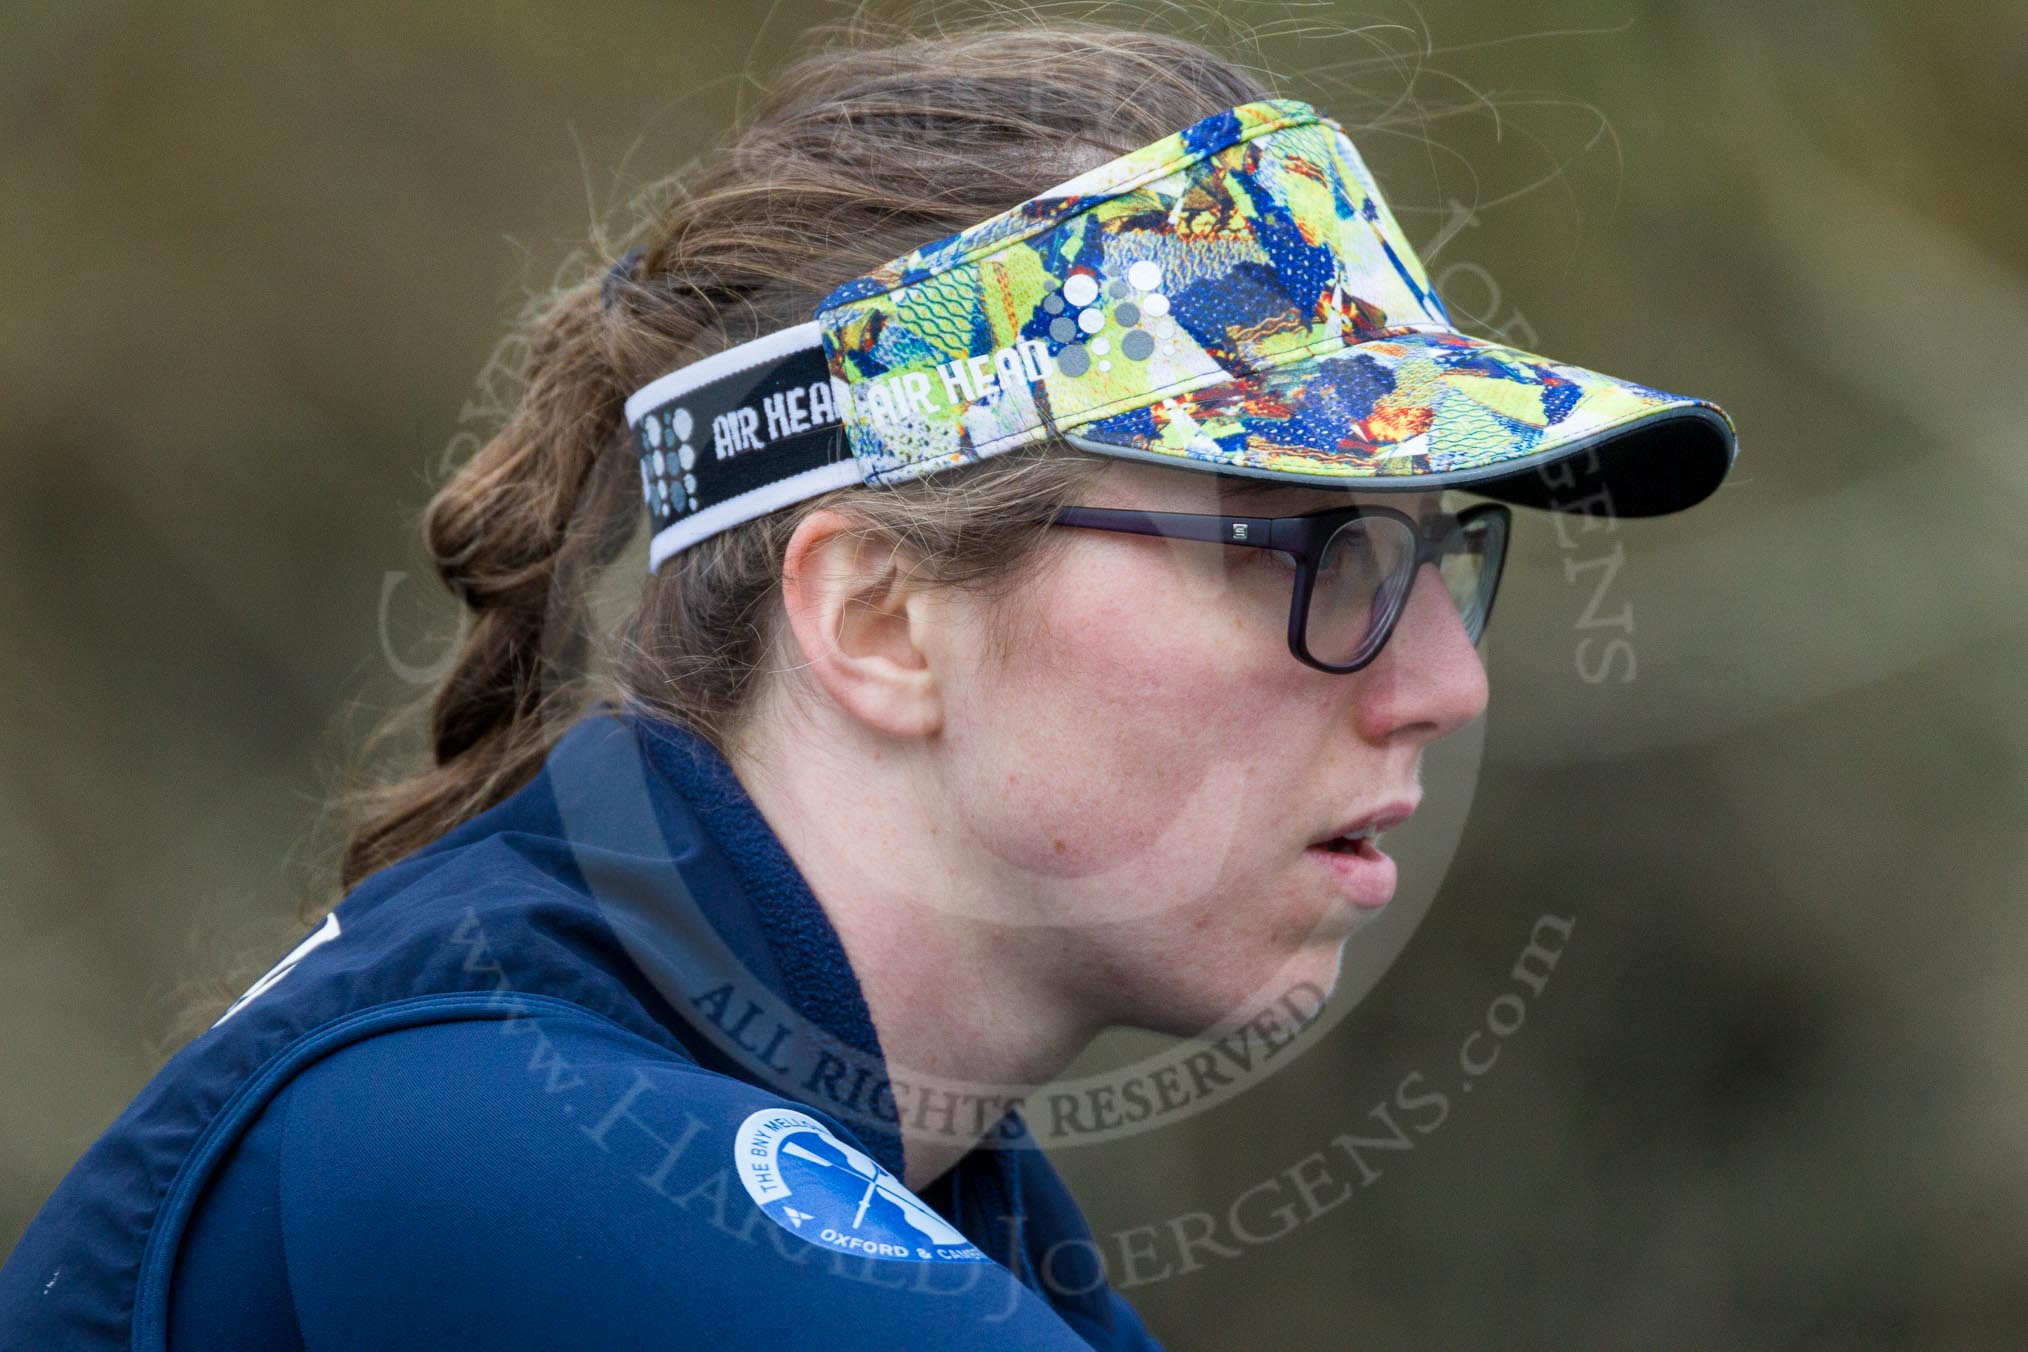 The Boat Race season 2016 - OUWBC training Wallingford: Ruth Siddorn, 4 seat in the OUWBC Blue Boat.
River Thames,
Wallingford,
Oxfordshire,

on 29 February 2016 at 16:03, image #82